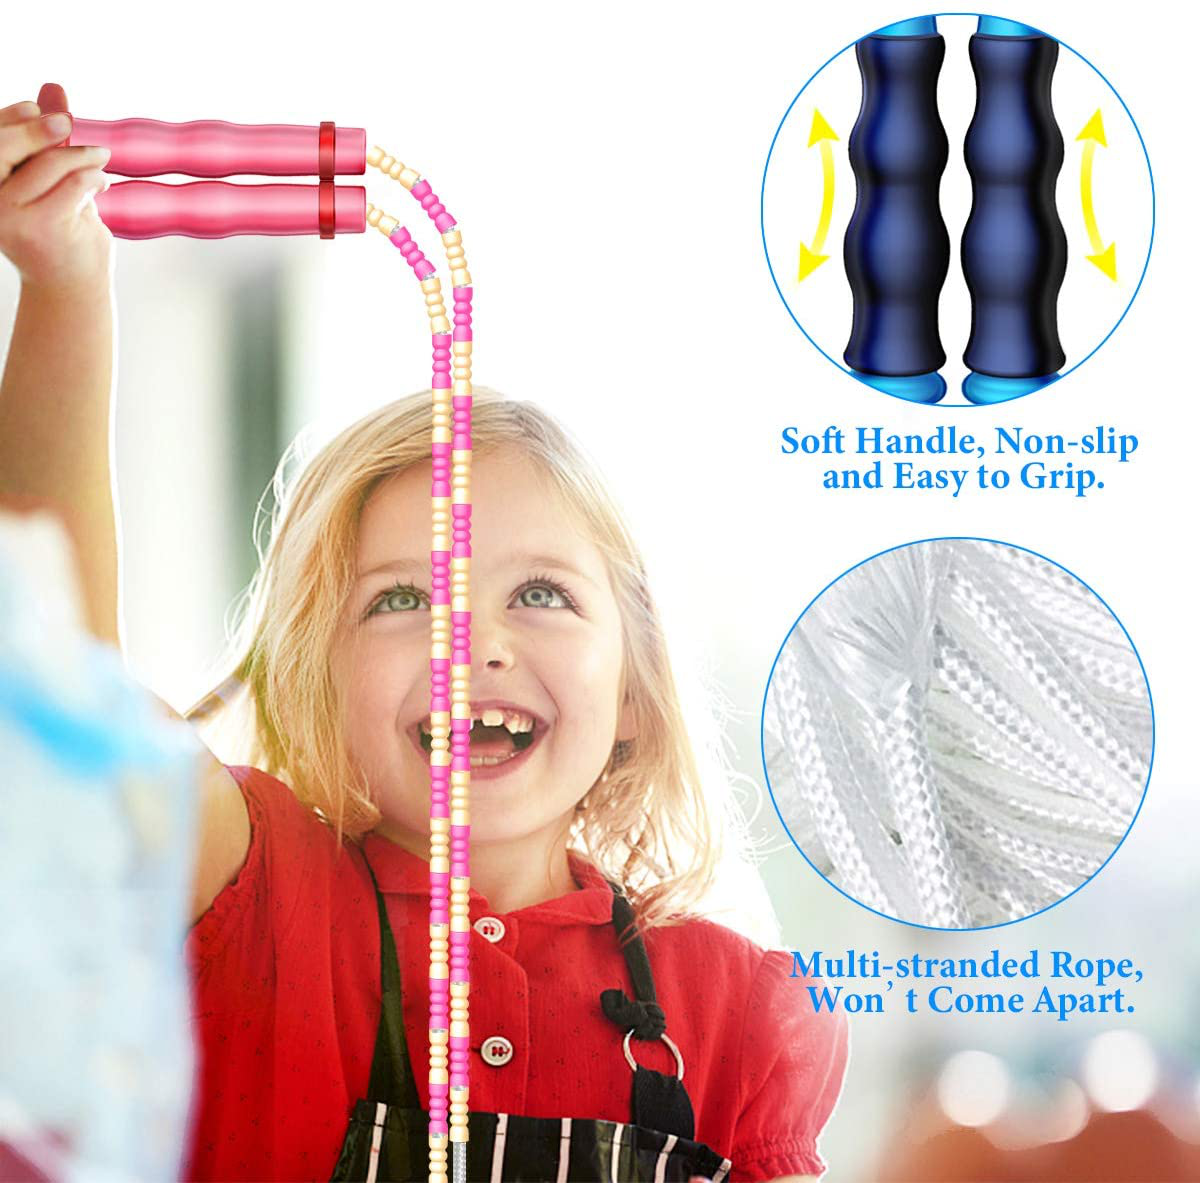 Jump Rope Kids, Wekin Soft Beaded Skipping Rope Kids Girls Boys, Tangle-Free Segmented Adjustable for Women Men, Kids Exercise Equipment for Keeping Fit, Workout, -9.8 Ft 2 Pack (Pink+Blue)